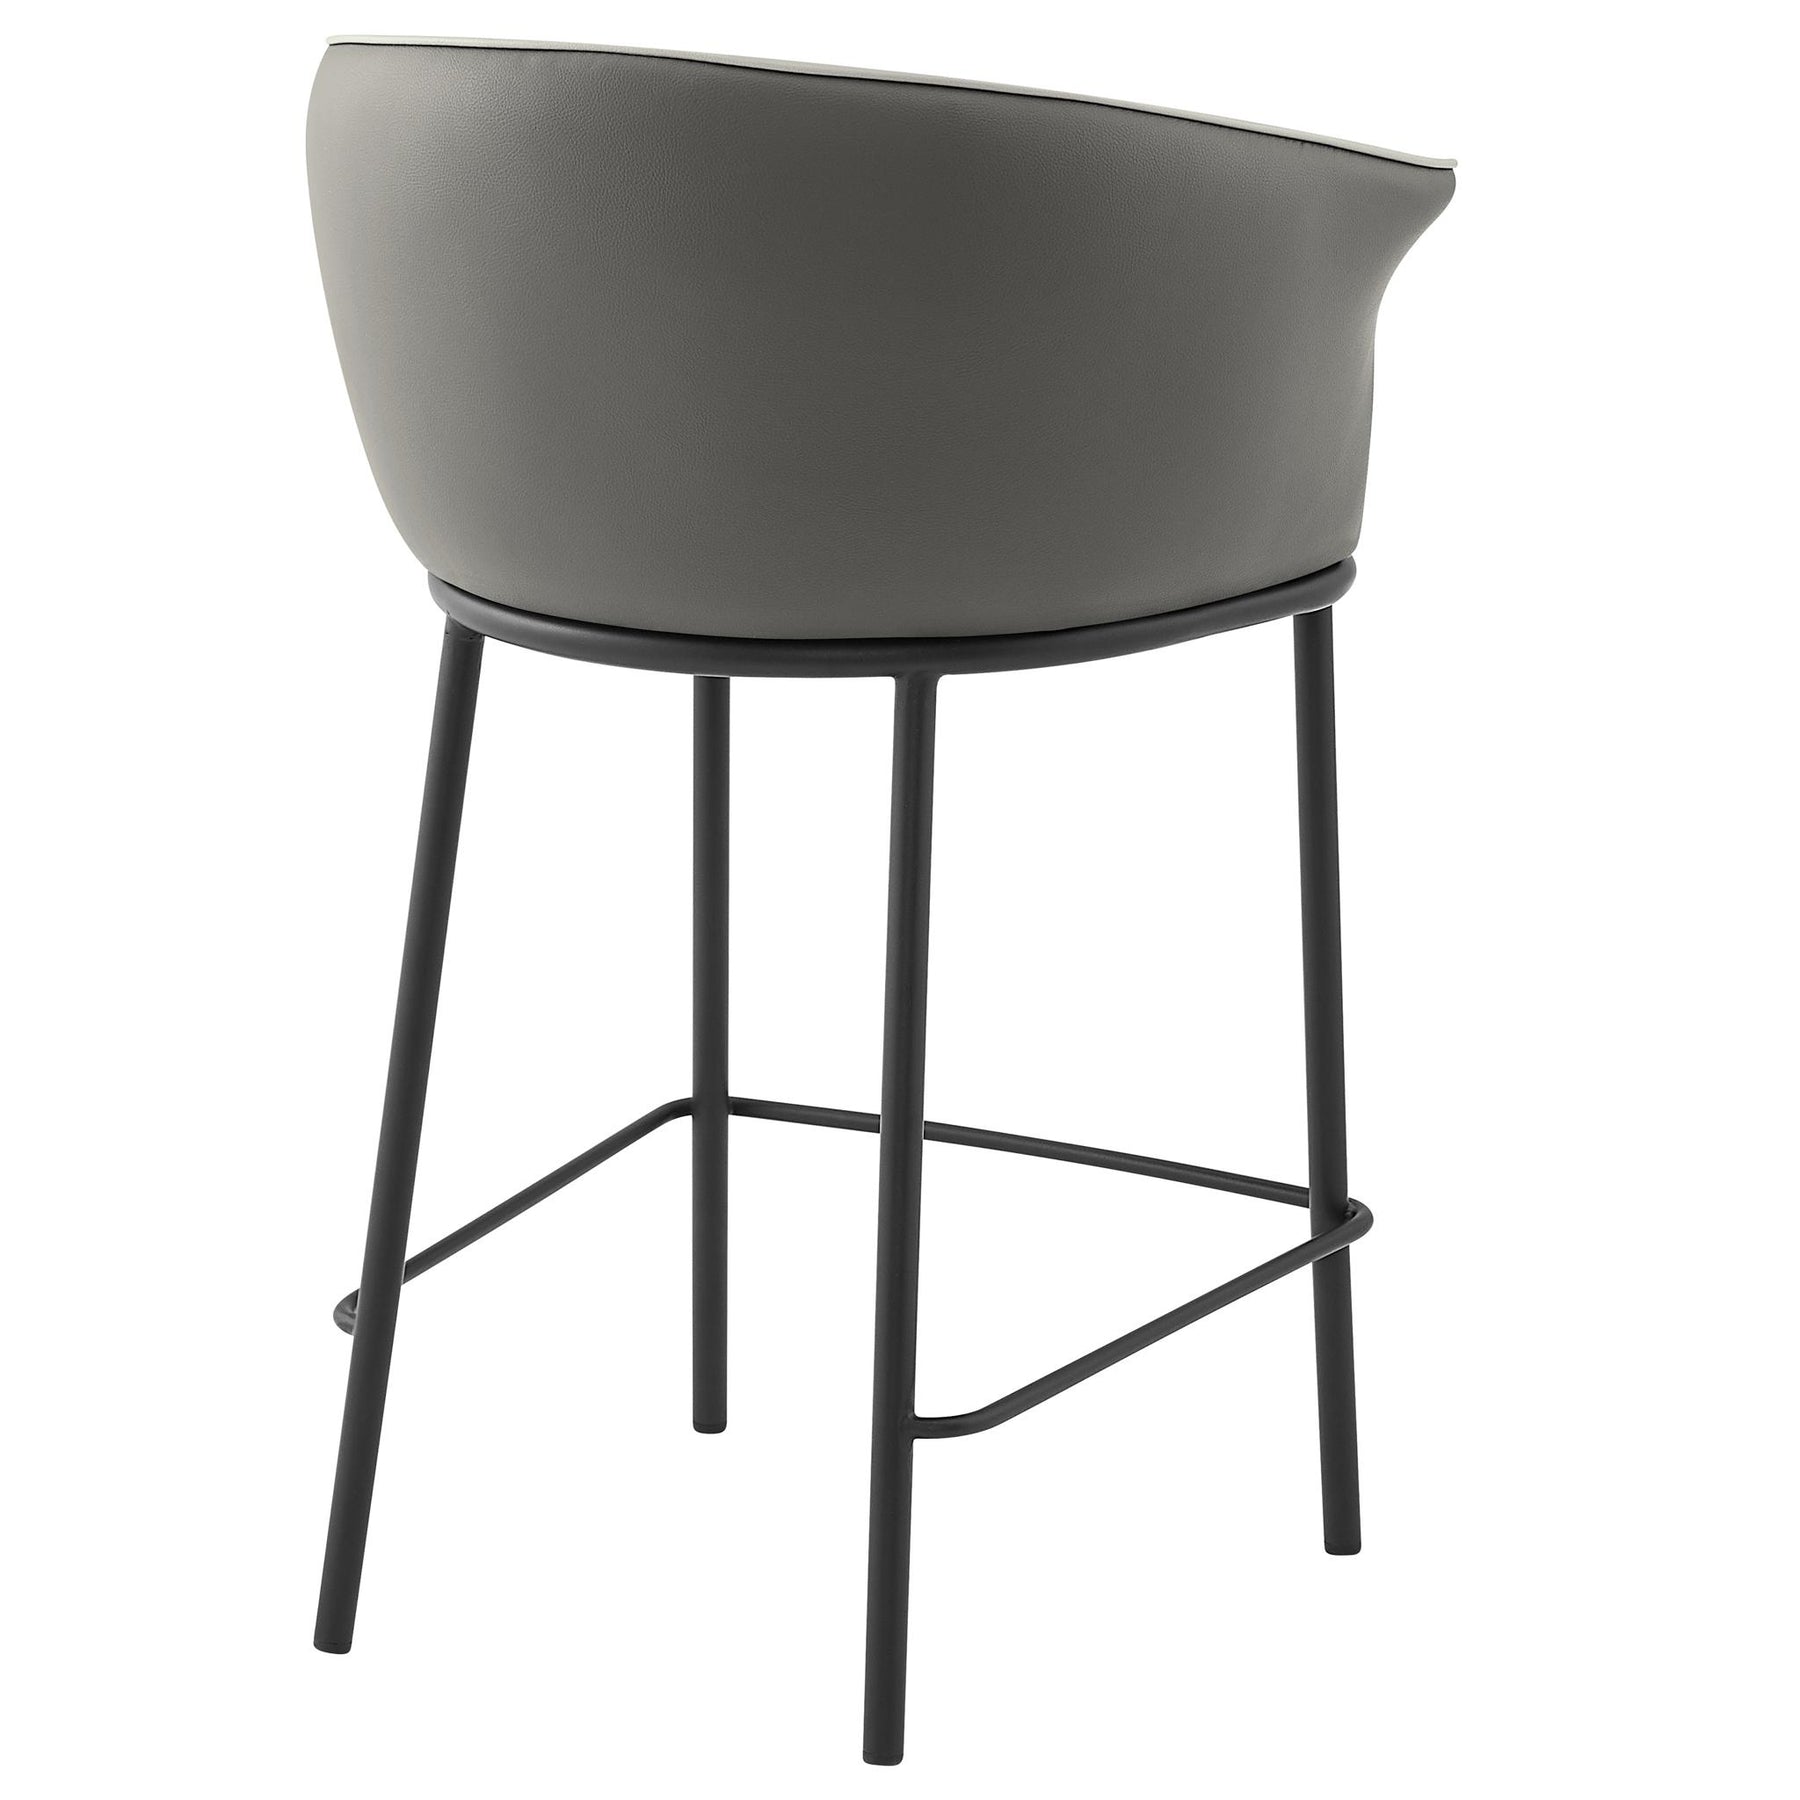 Seymor PU Counter Stool w/ Arms by New Pacific Direct - 1240010